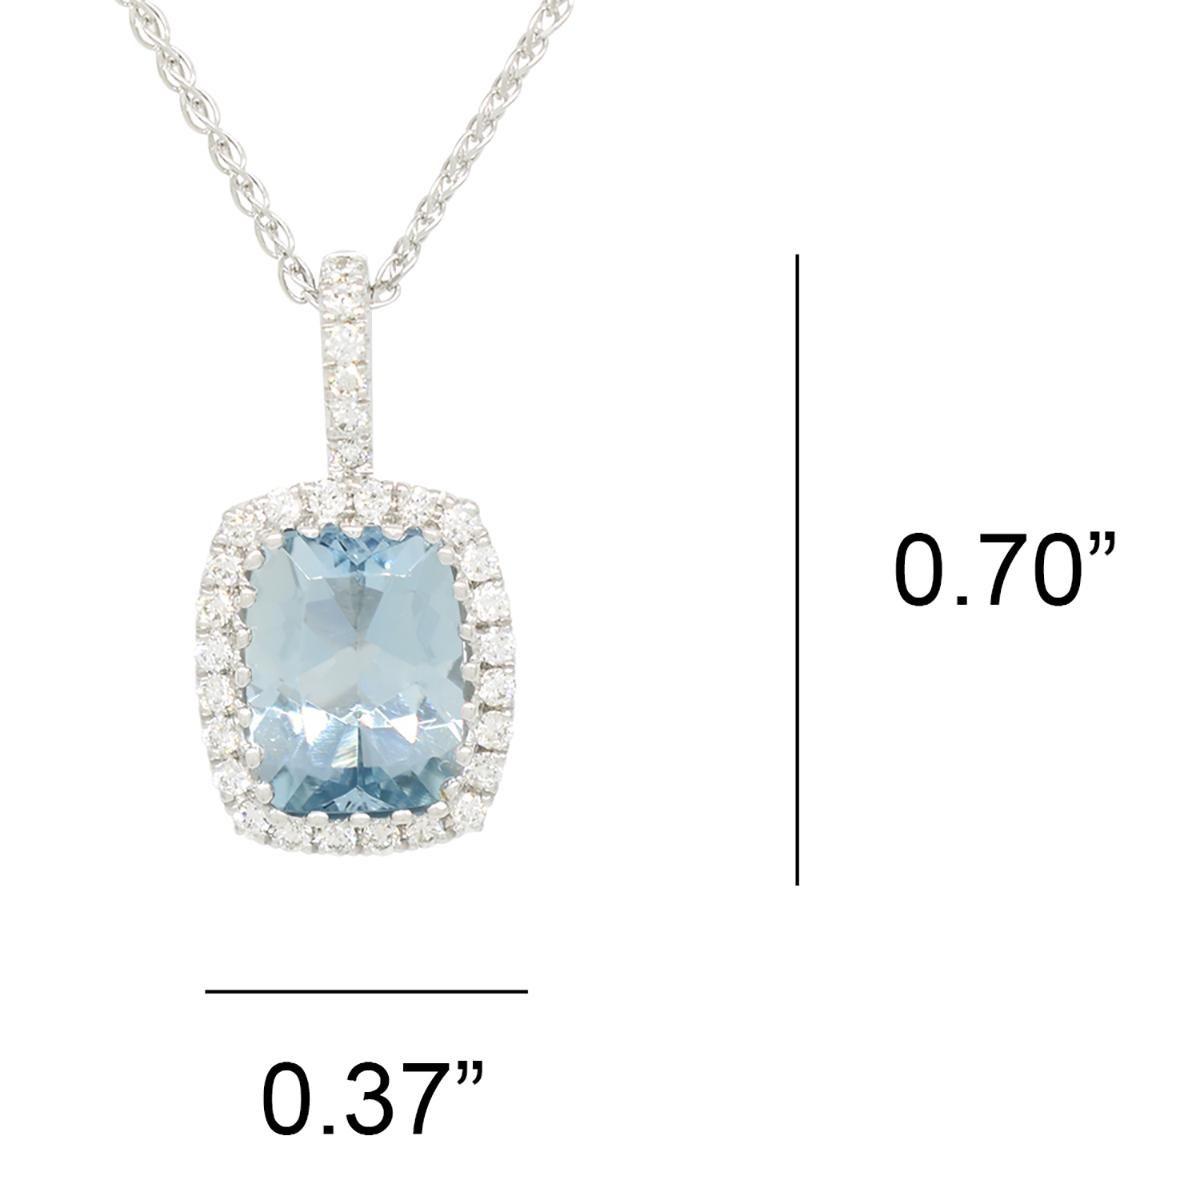 1.64 Carats Cushion Cut Aquamarine Necklace with Genuine Diamonds in White Gold For Sale 2